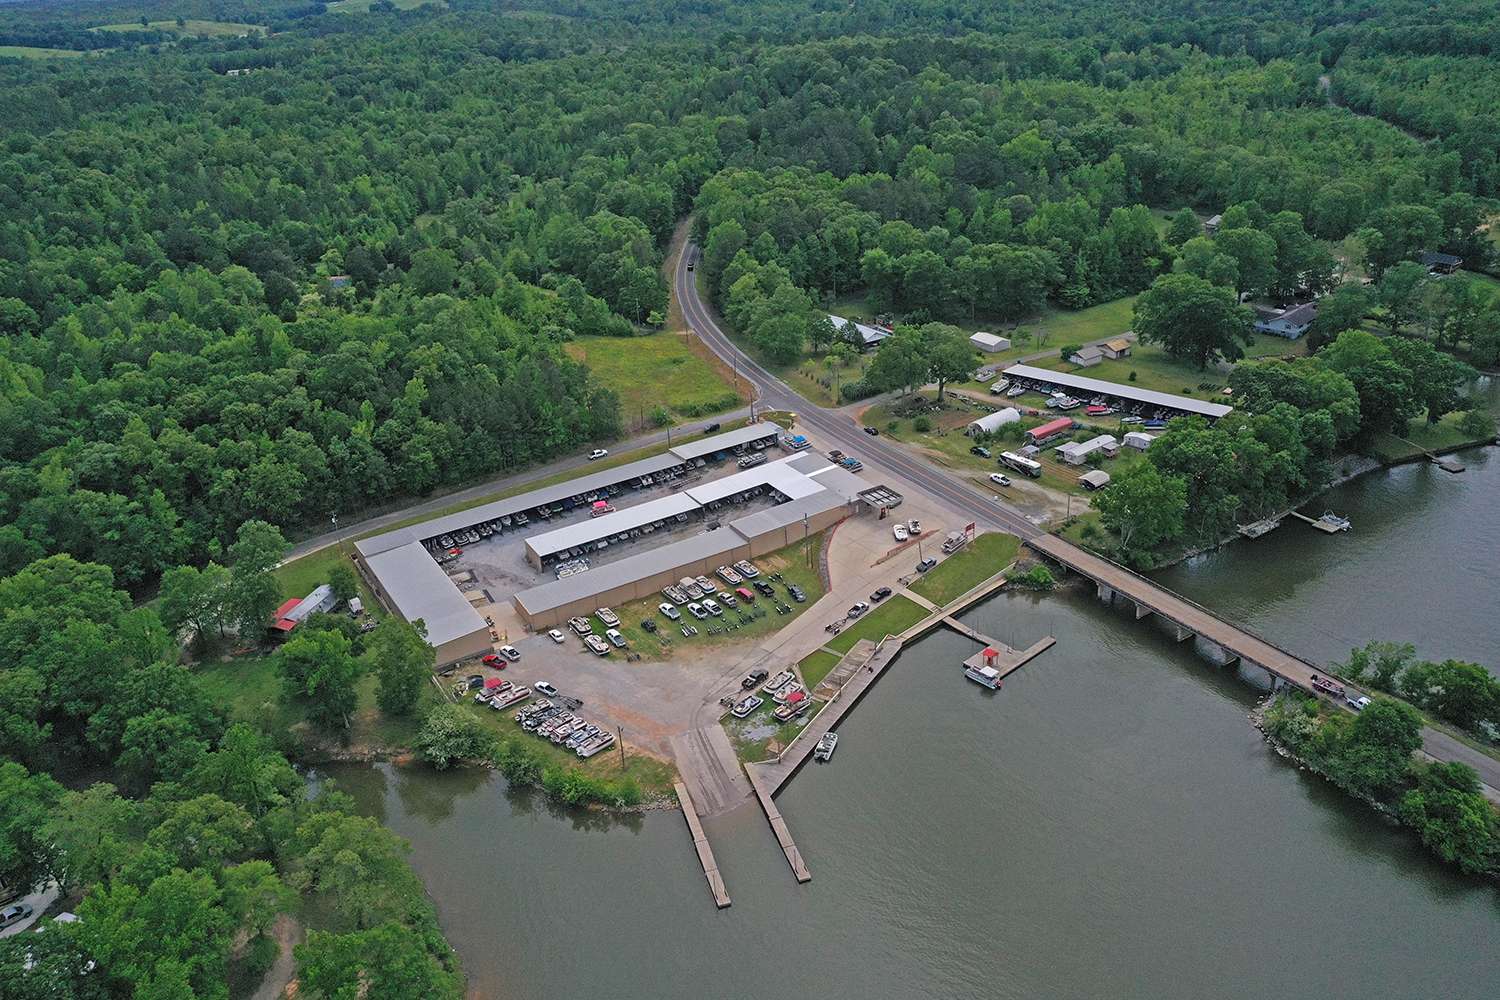 Moving to Logan Martin, the next lake down on the Coosa River, here is a shot of Poor House Marina, which is a relatively popular pay launch site on the upper end of Logan Martin.